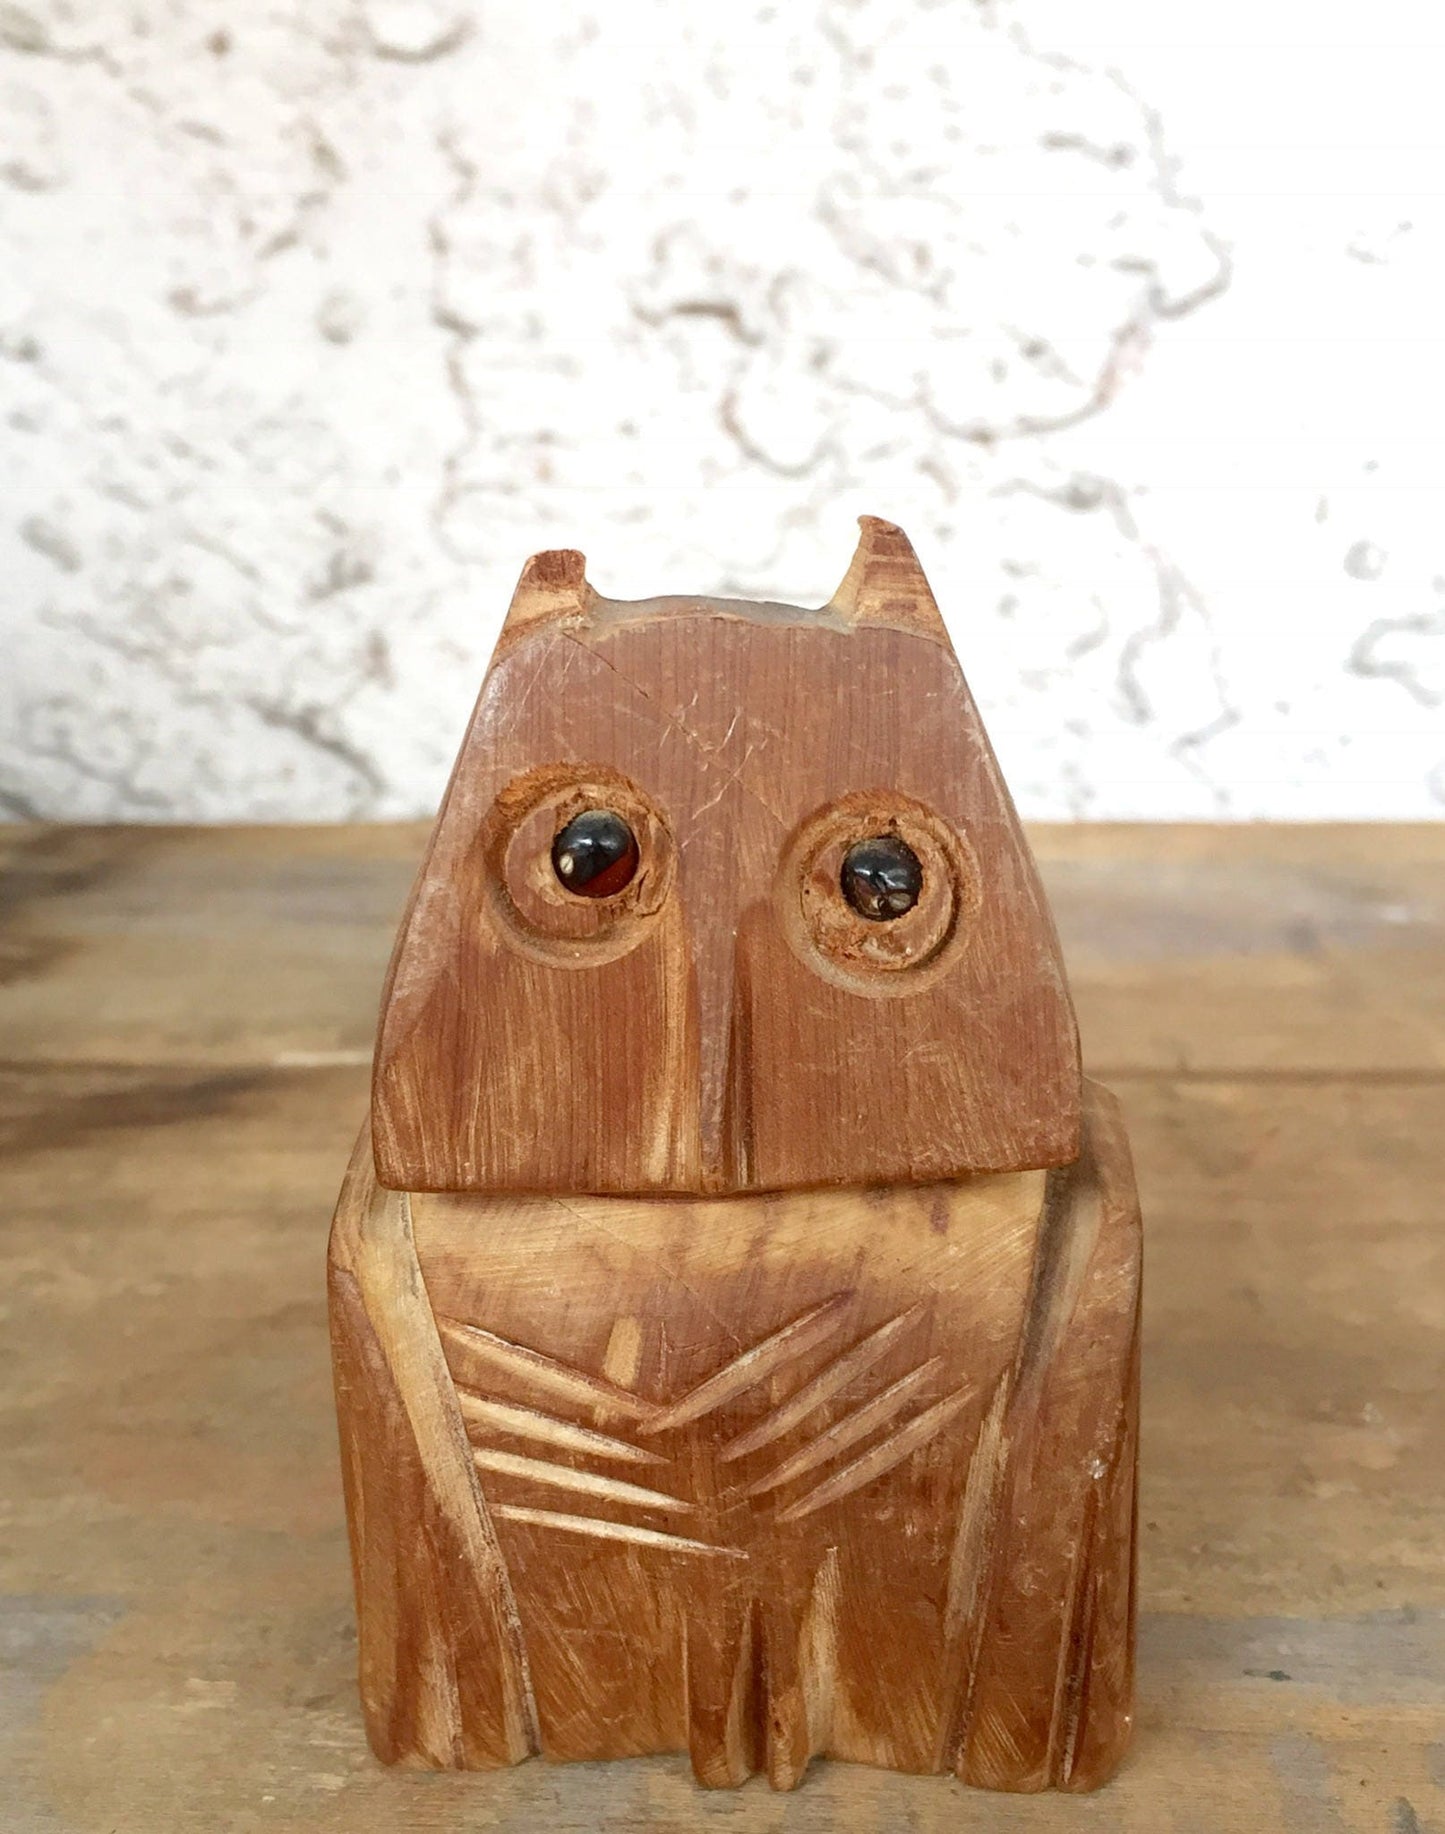 Wooden owl pencil holder carved in folk art style, with large eyes and textured feather details, sitting on a wooden surface against a white wall background.